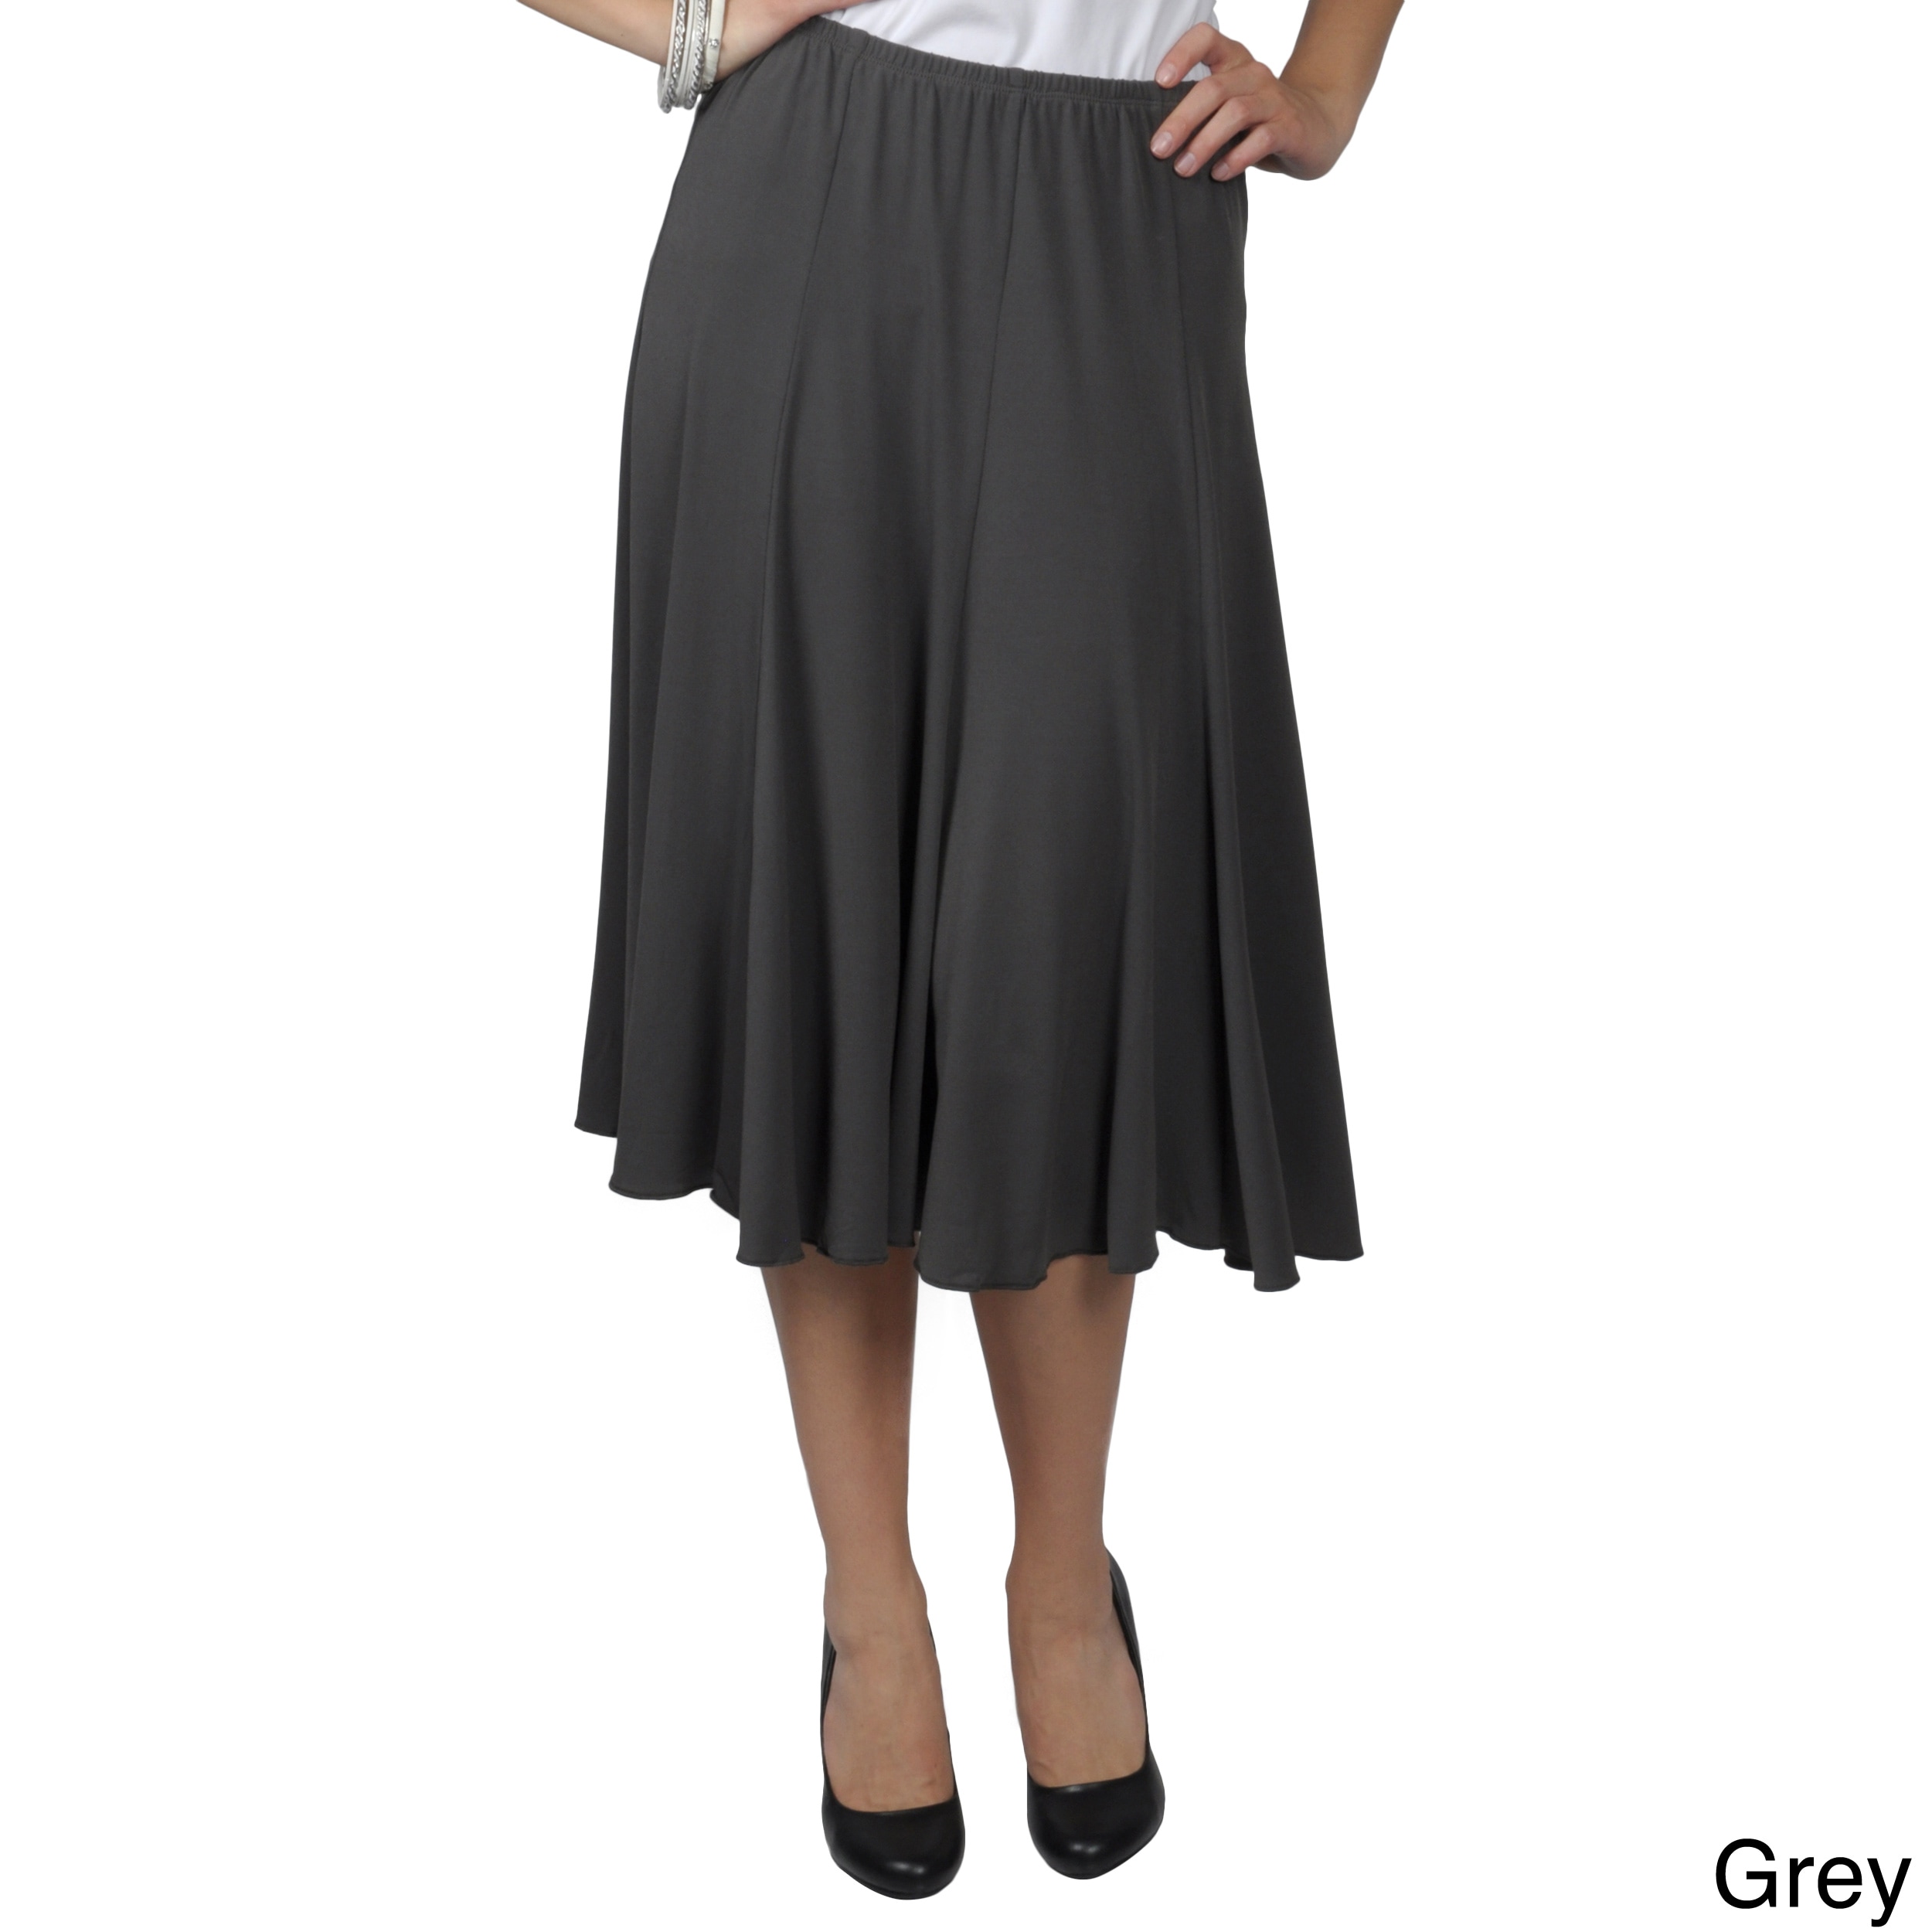 Journee Collection Womens Solid colored Flowing Knit Flare Skirt